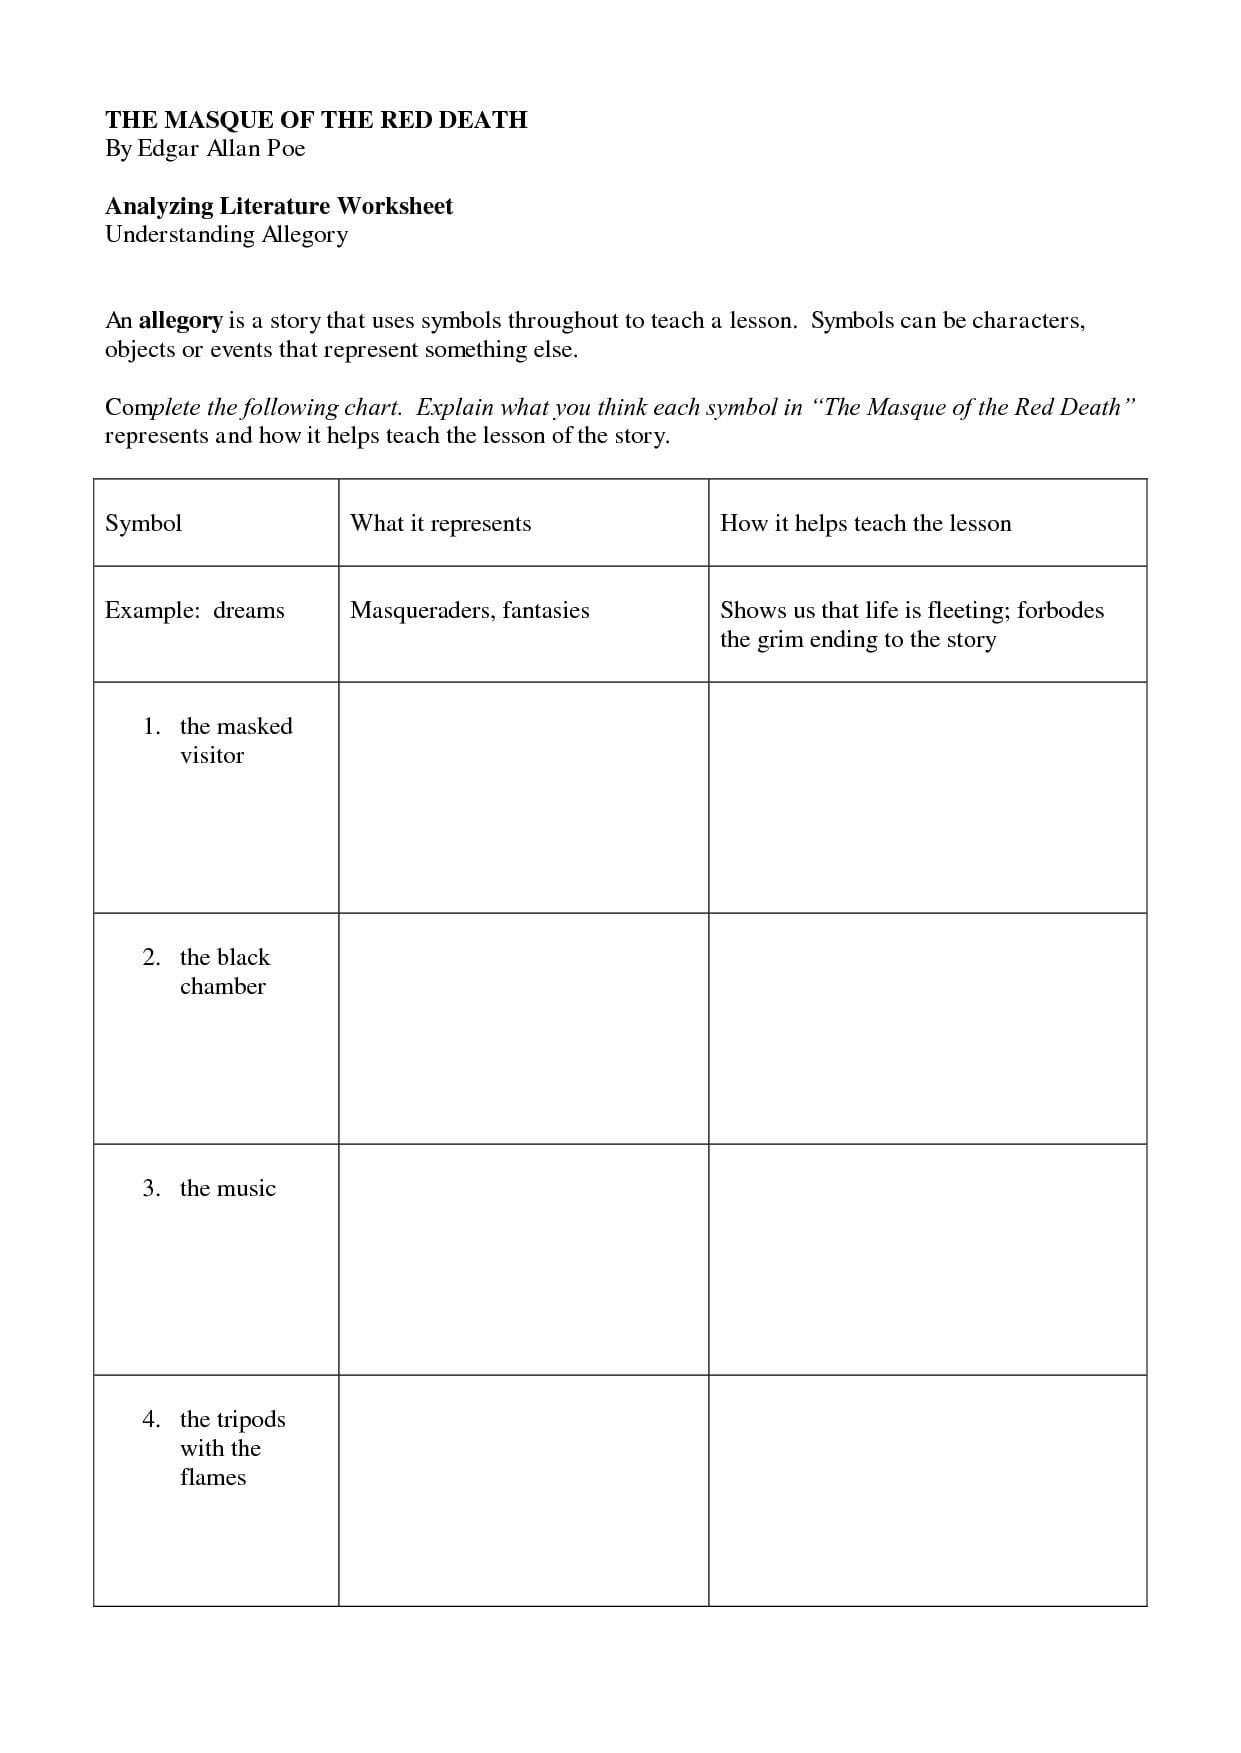 masque-of-the-red-death-worksheet-answer-key-db-excel